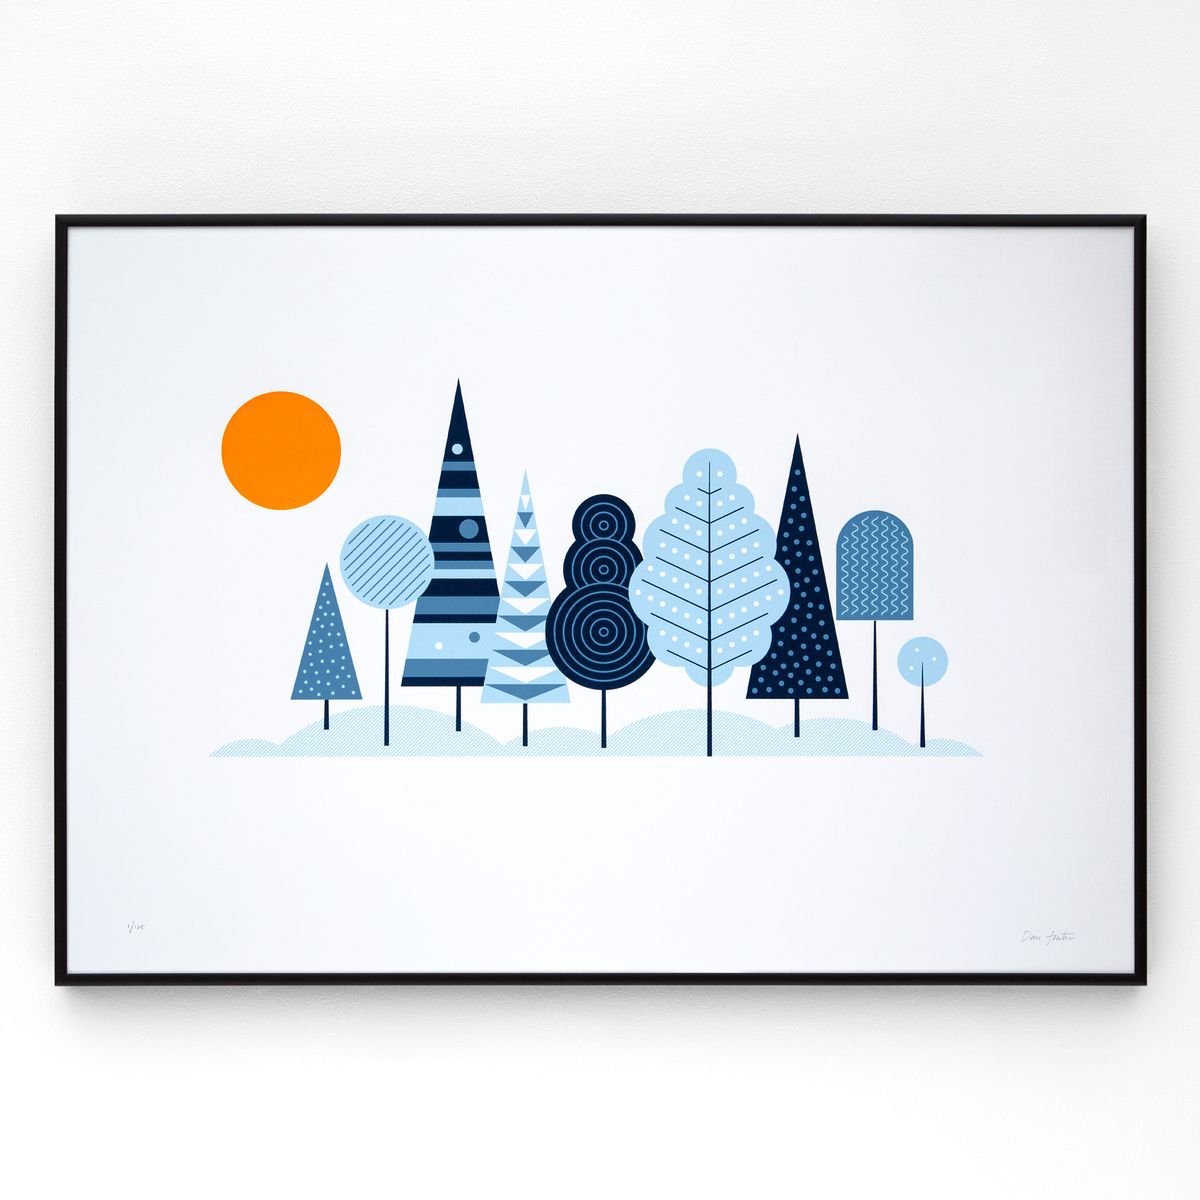 Woodland A2 limited edition screen print by The Lost Fox